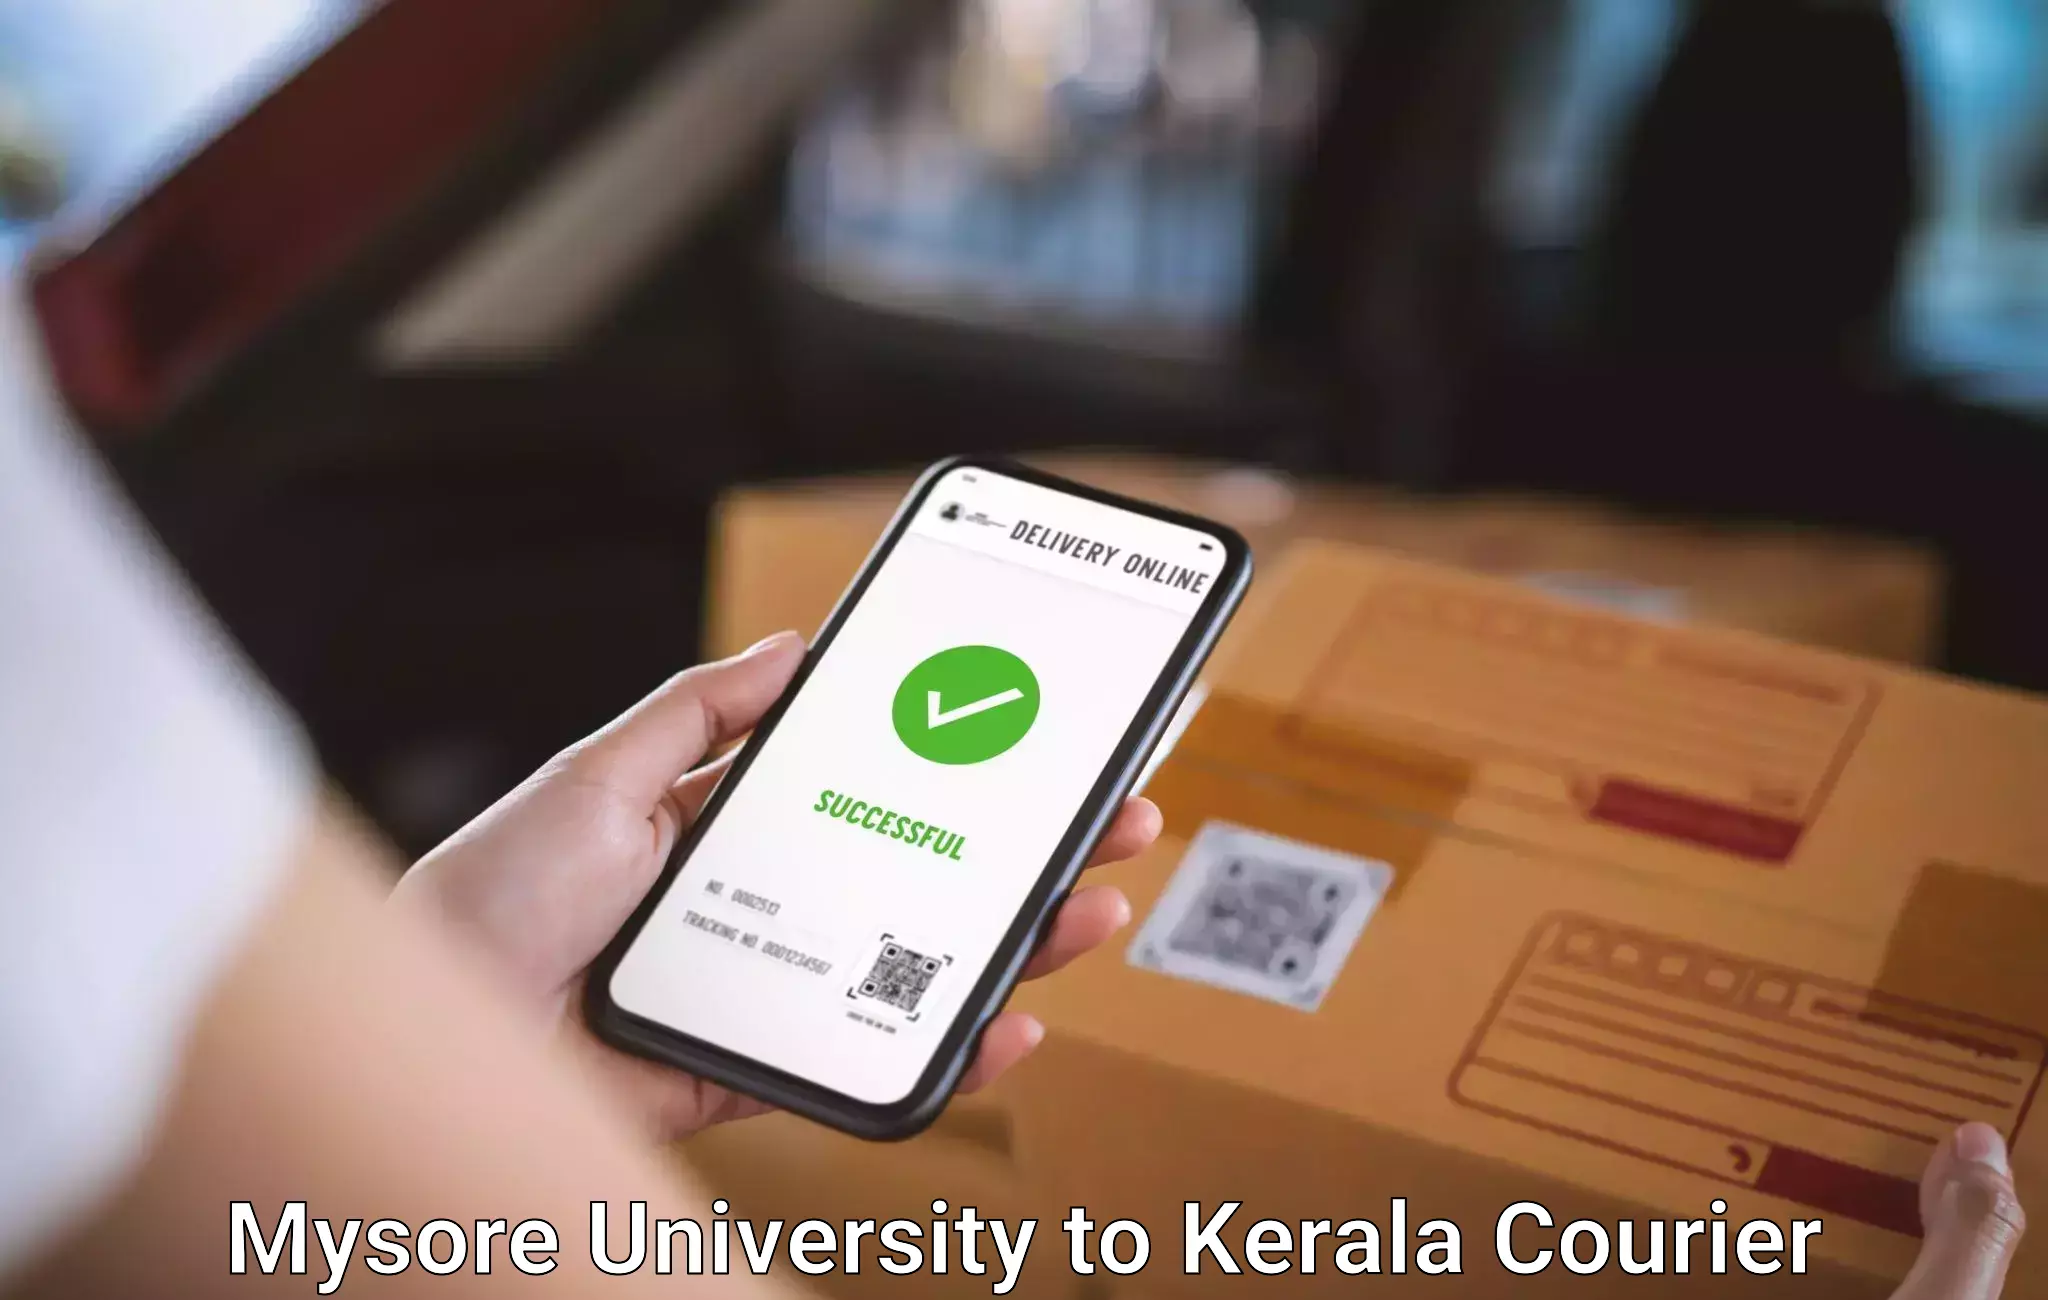 Baggage delivery solutions Mysore University to Kerala